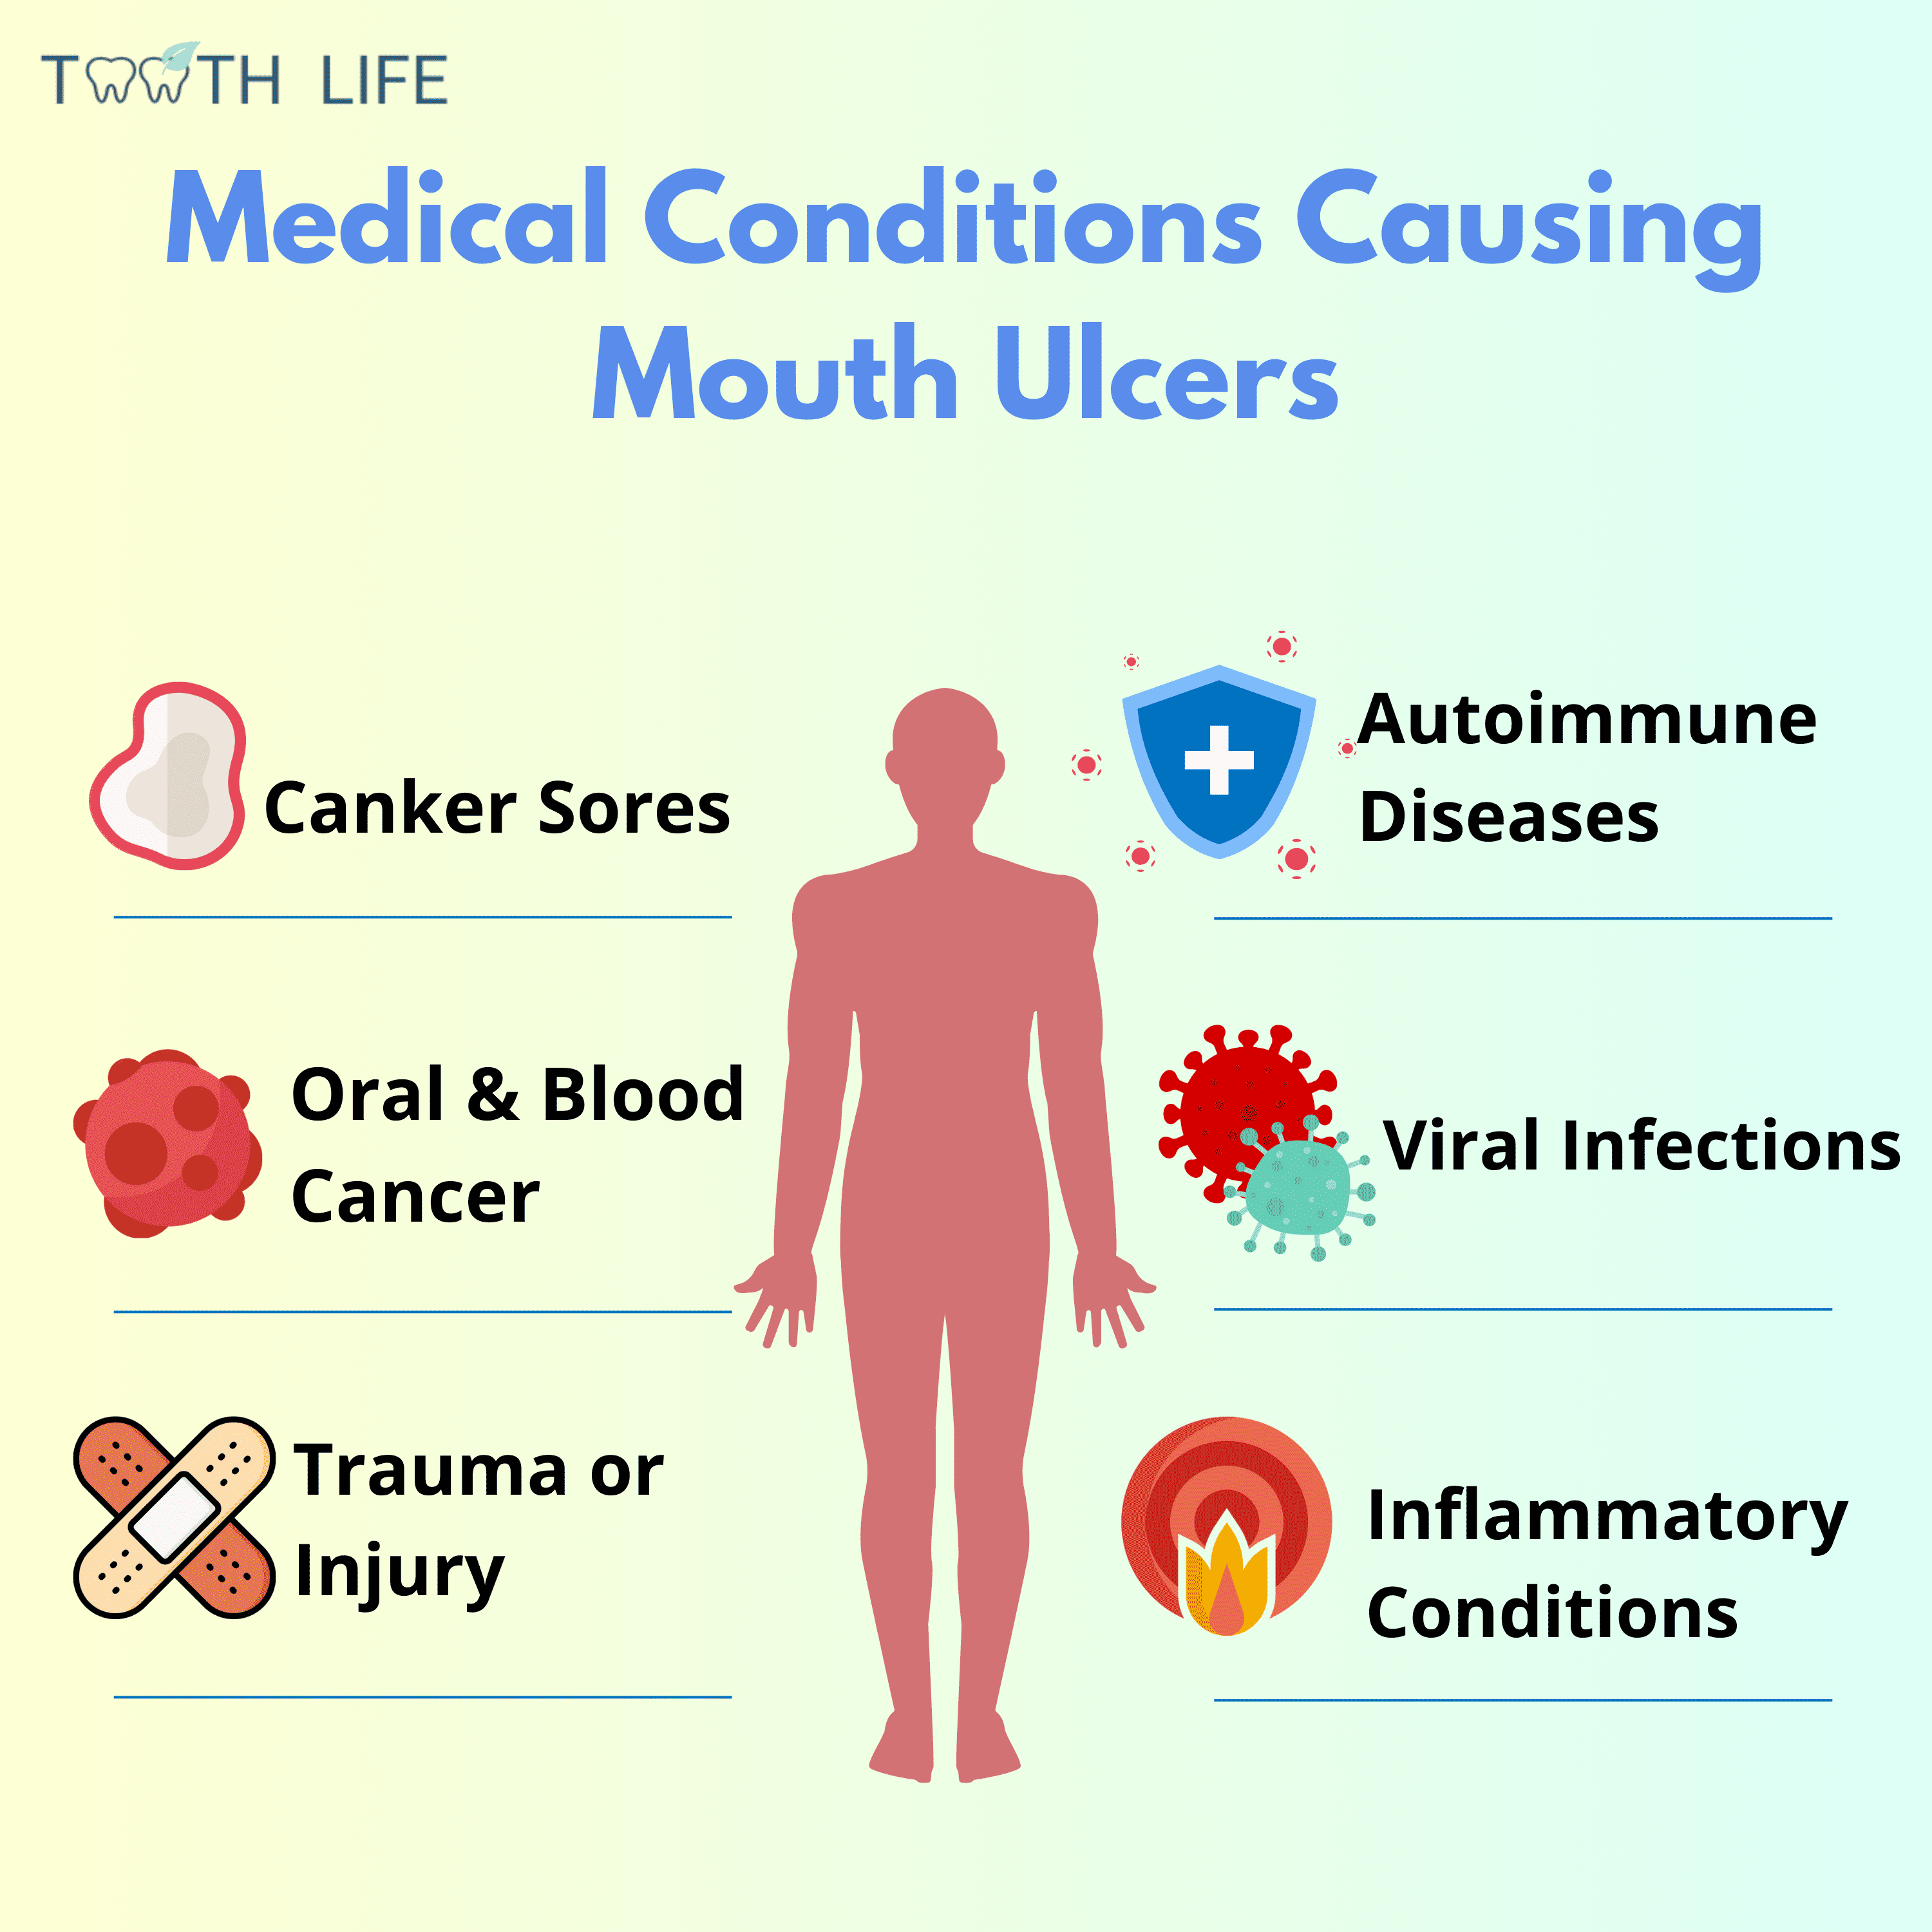 The different conditions that can lead to canker sores